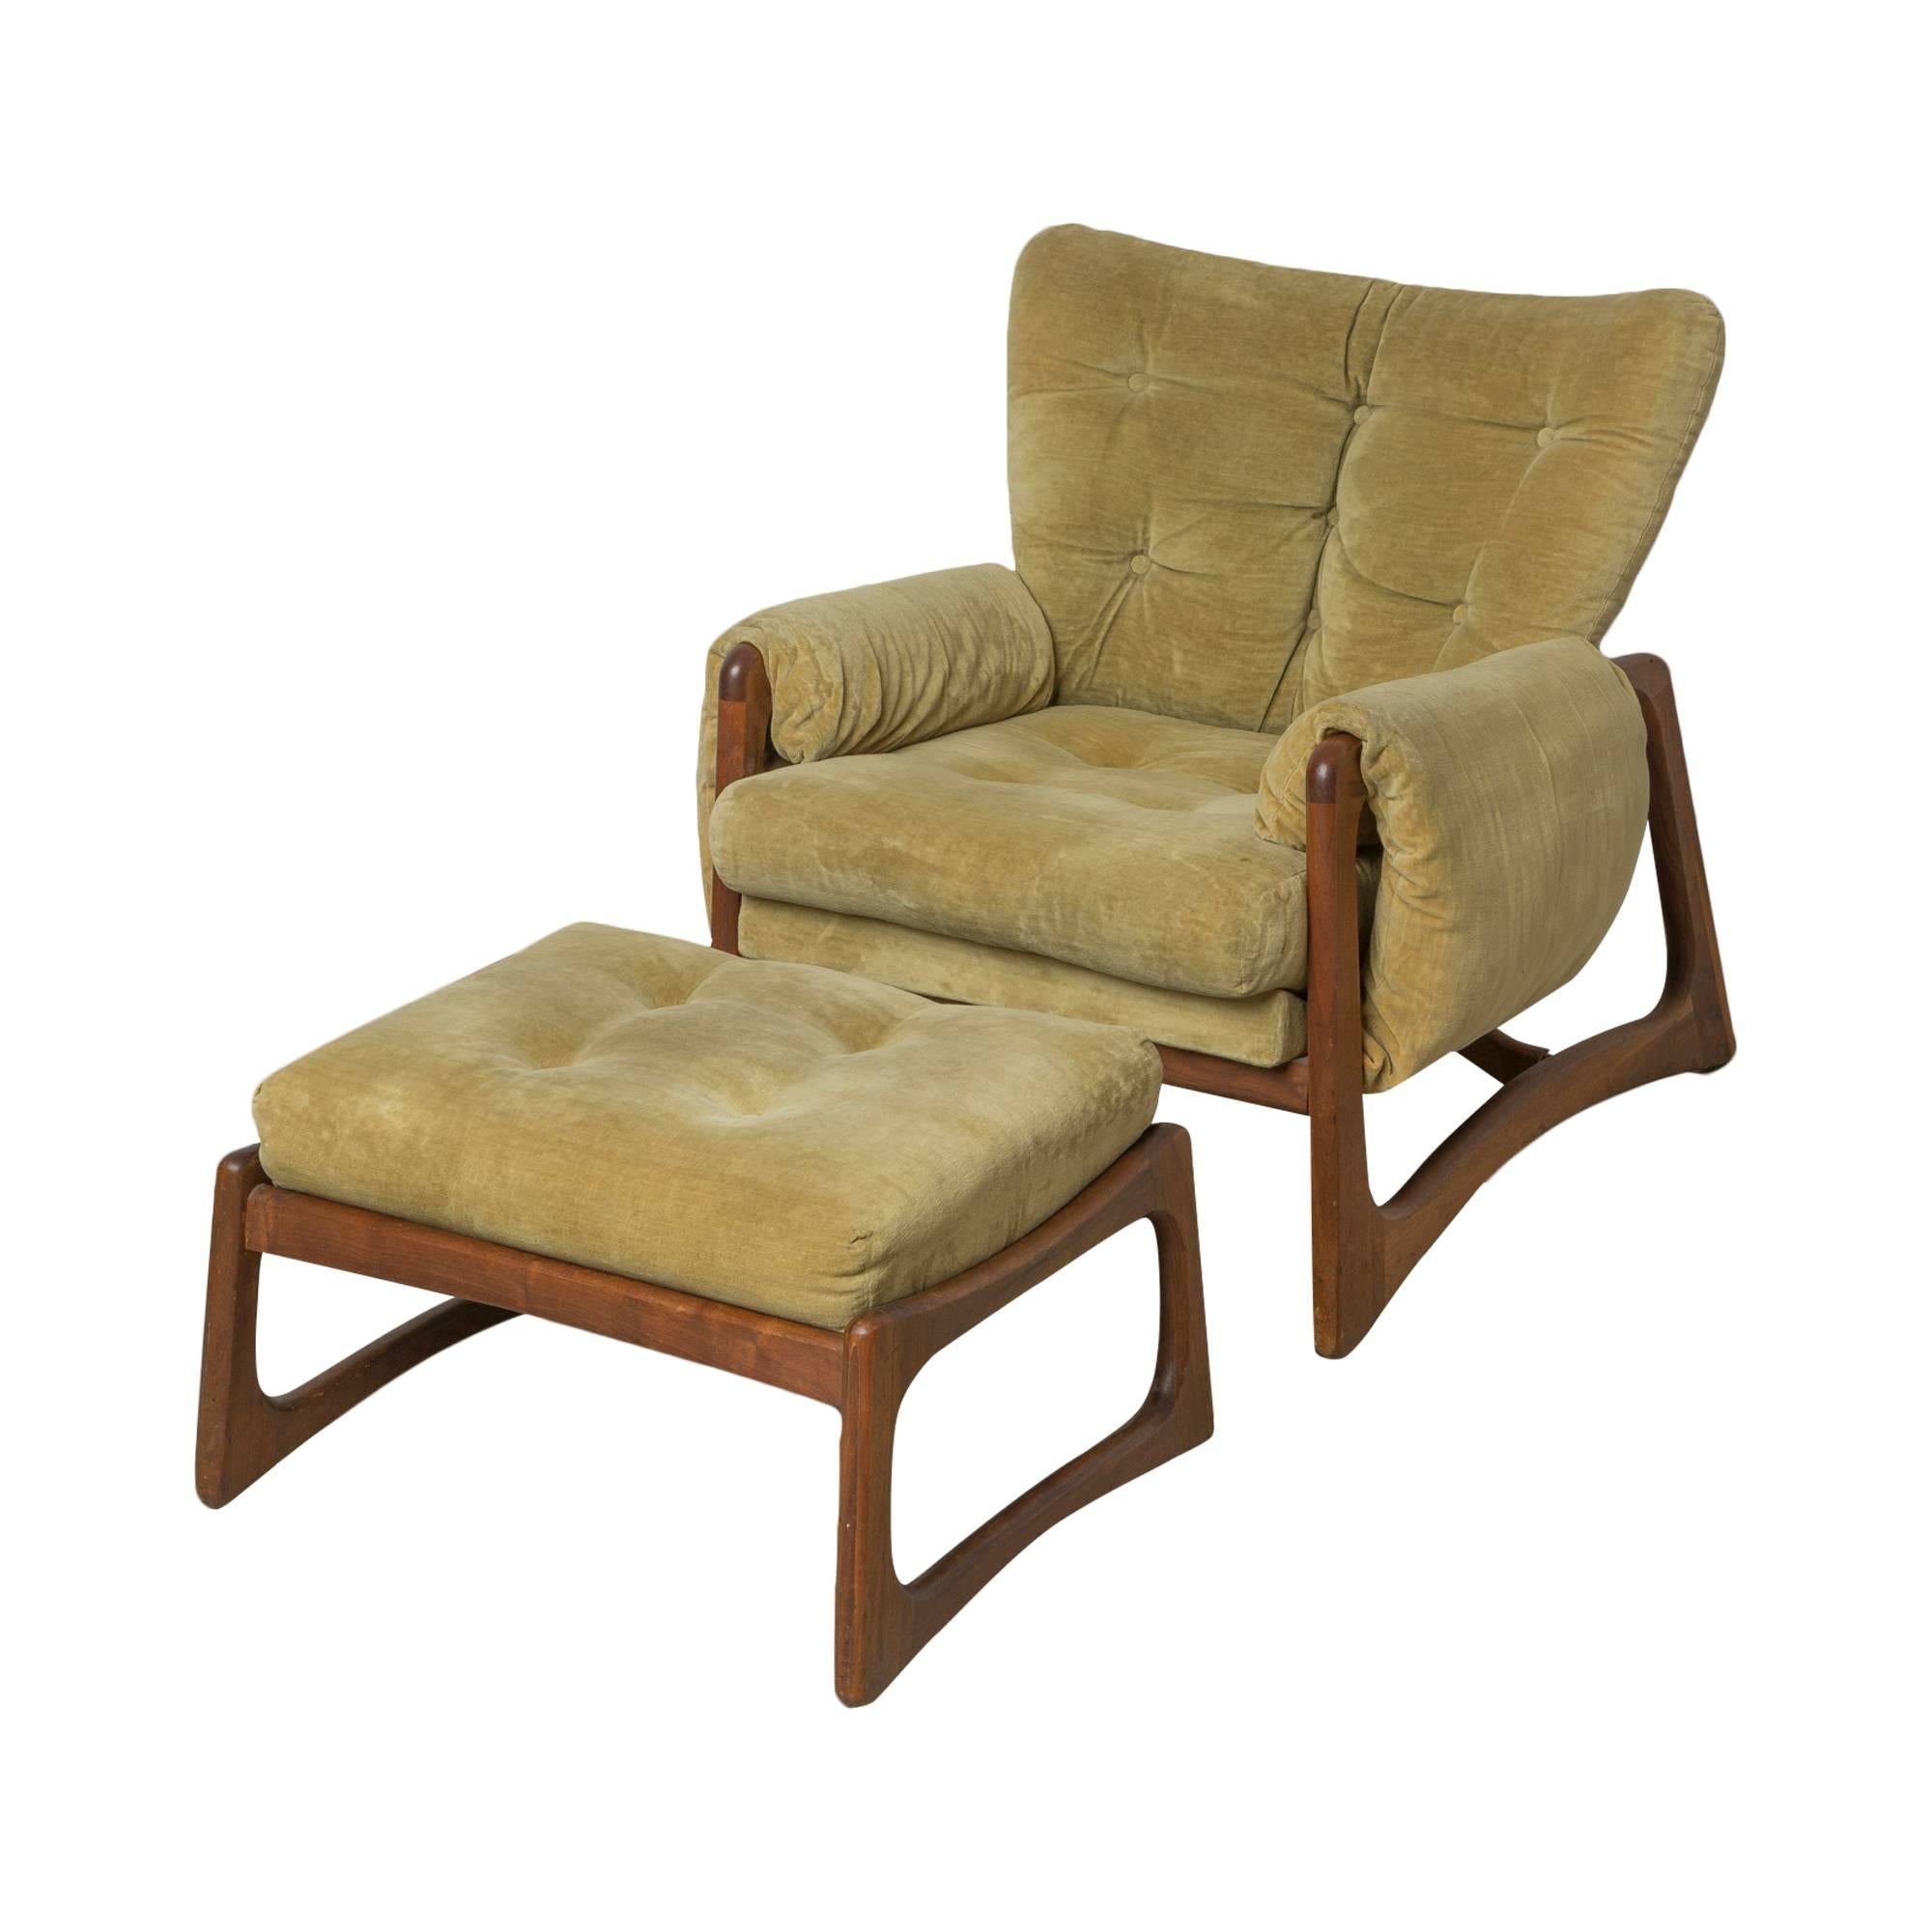 Lounge chair and ottoman by Adrian Pearsall for Craft Associates. Upholstered in luxurious green vintage velvet with a beautiful walnut frame. This piece is unique to others you may find in a similar style in that it's accompanied by both an ottoman